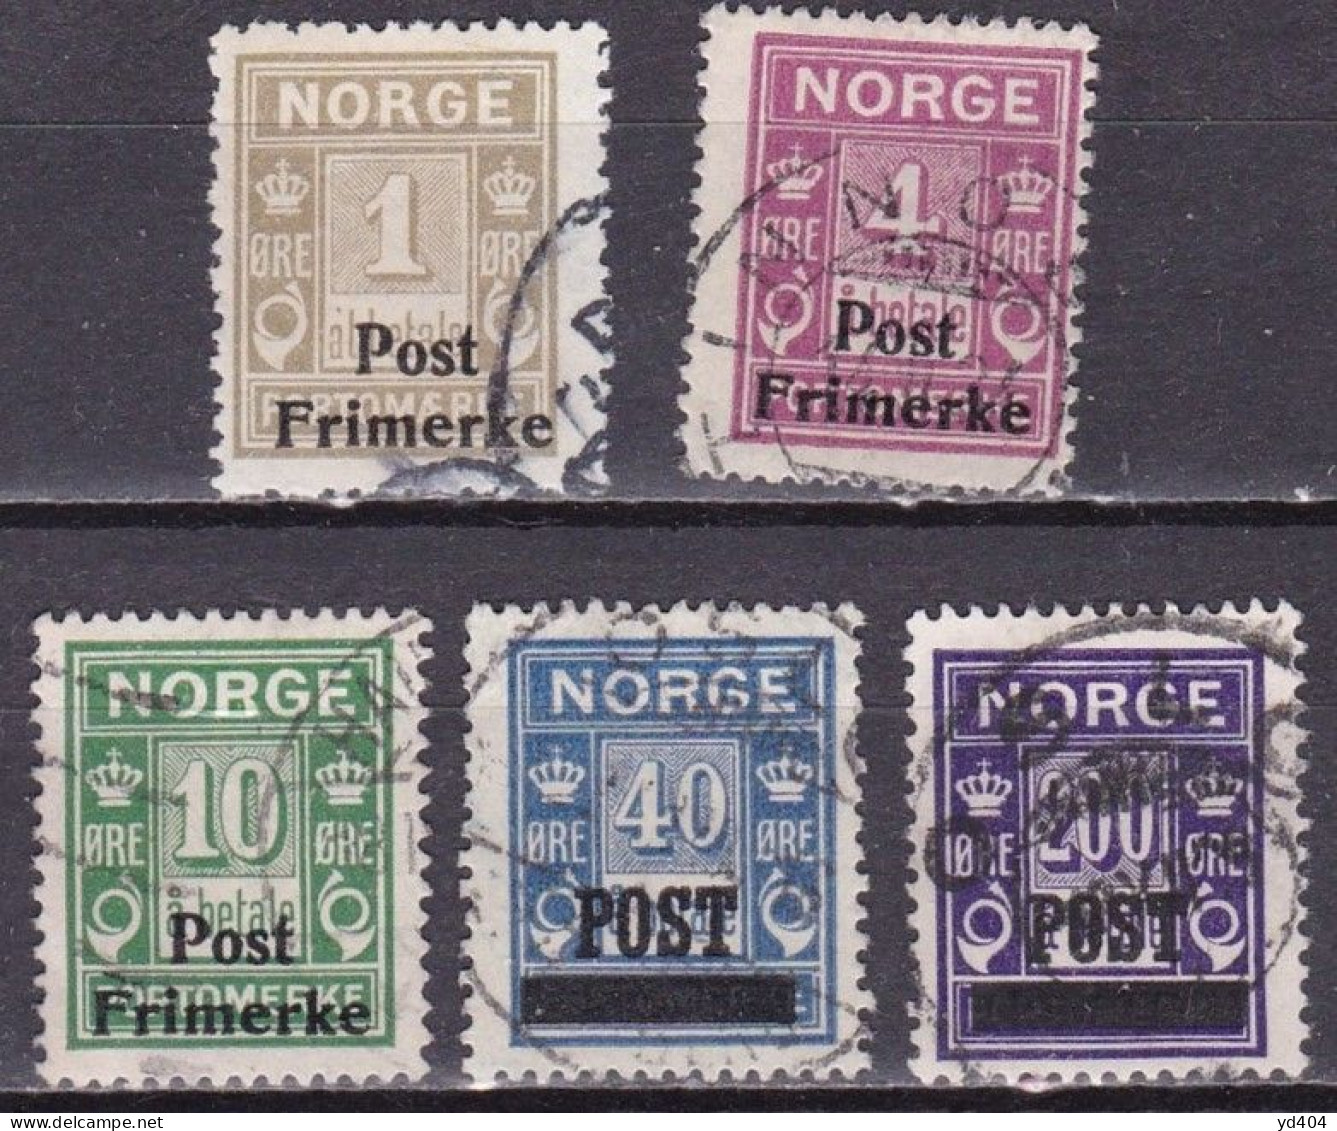 NO016 – NORVEGE - NORWAY – 1929 – POSTAGE DUE OVERPRINTED – SG # 204-212 USED 23,50 € - Used Stamps